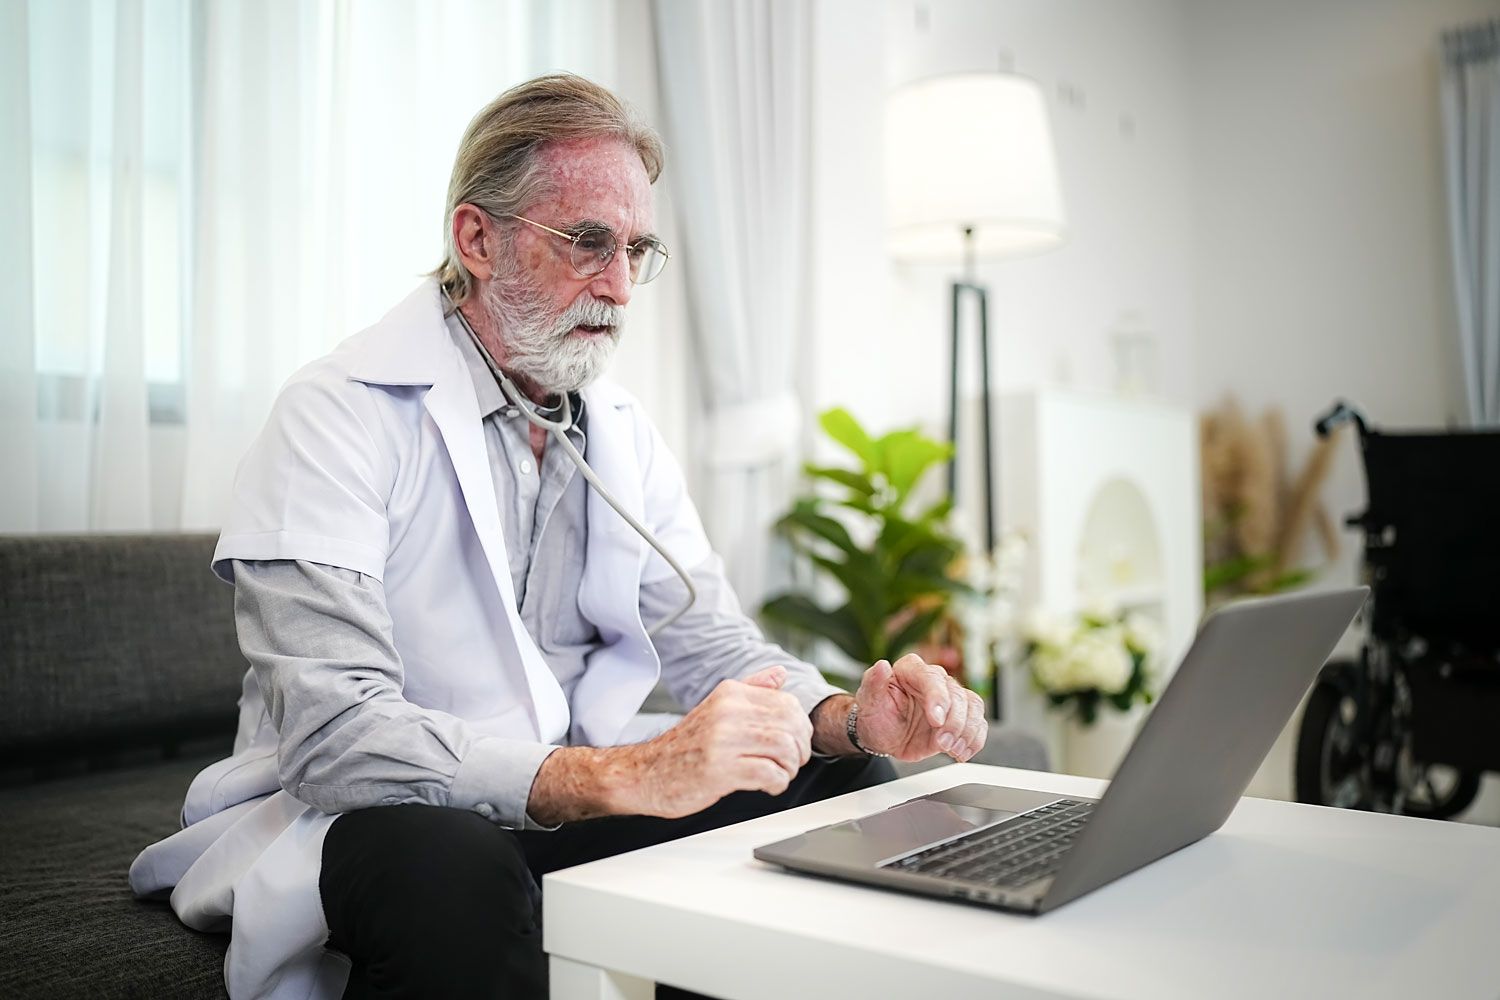 An older doctor using a laptop for medical work